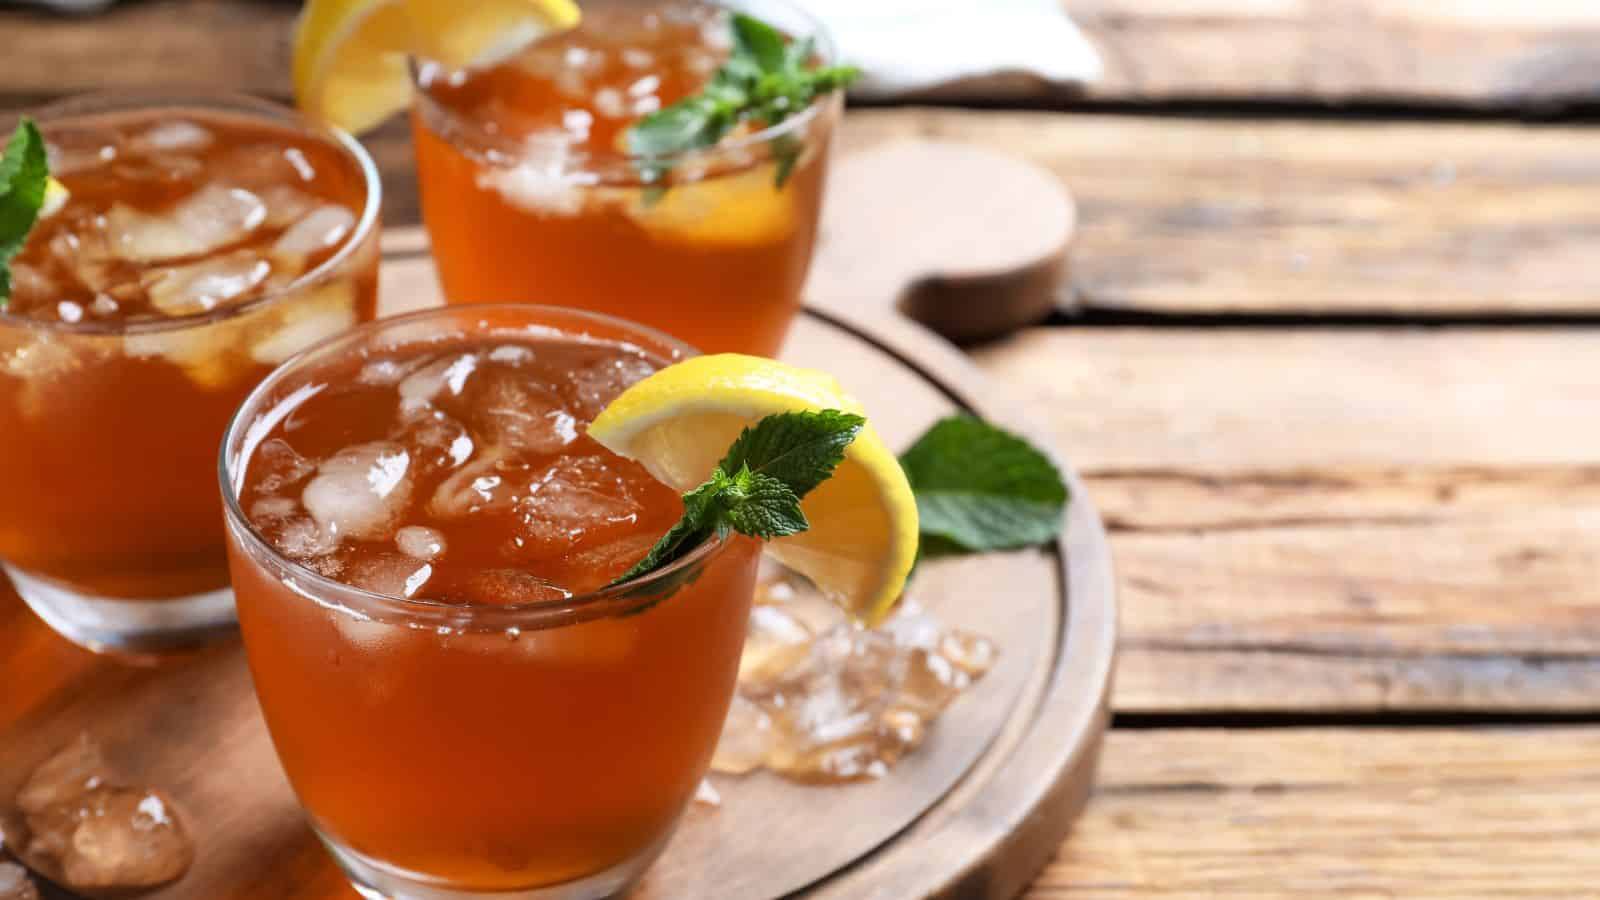 Three glasses of iced tea in a wooden tray.